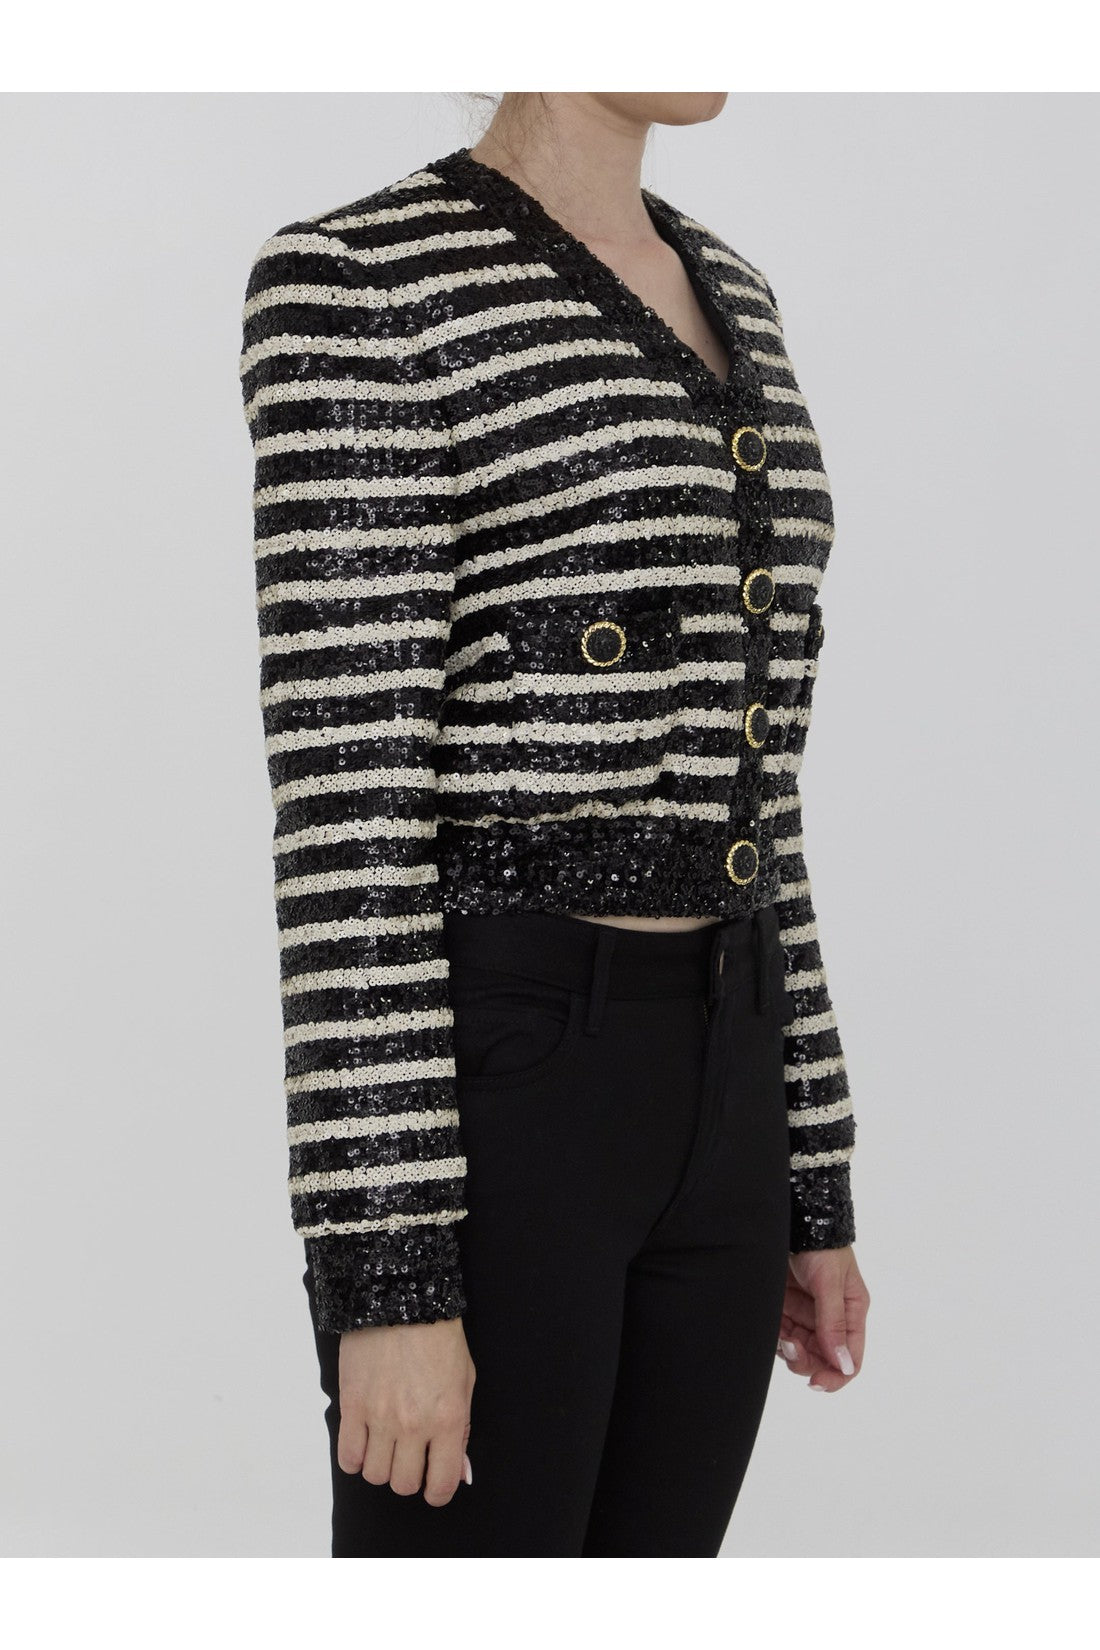 Sequined cropped jacket